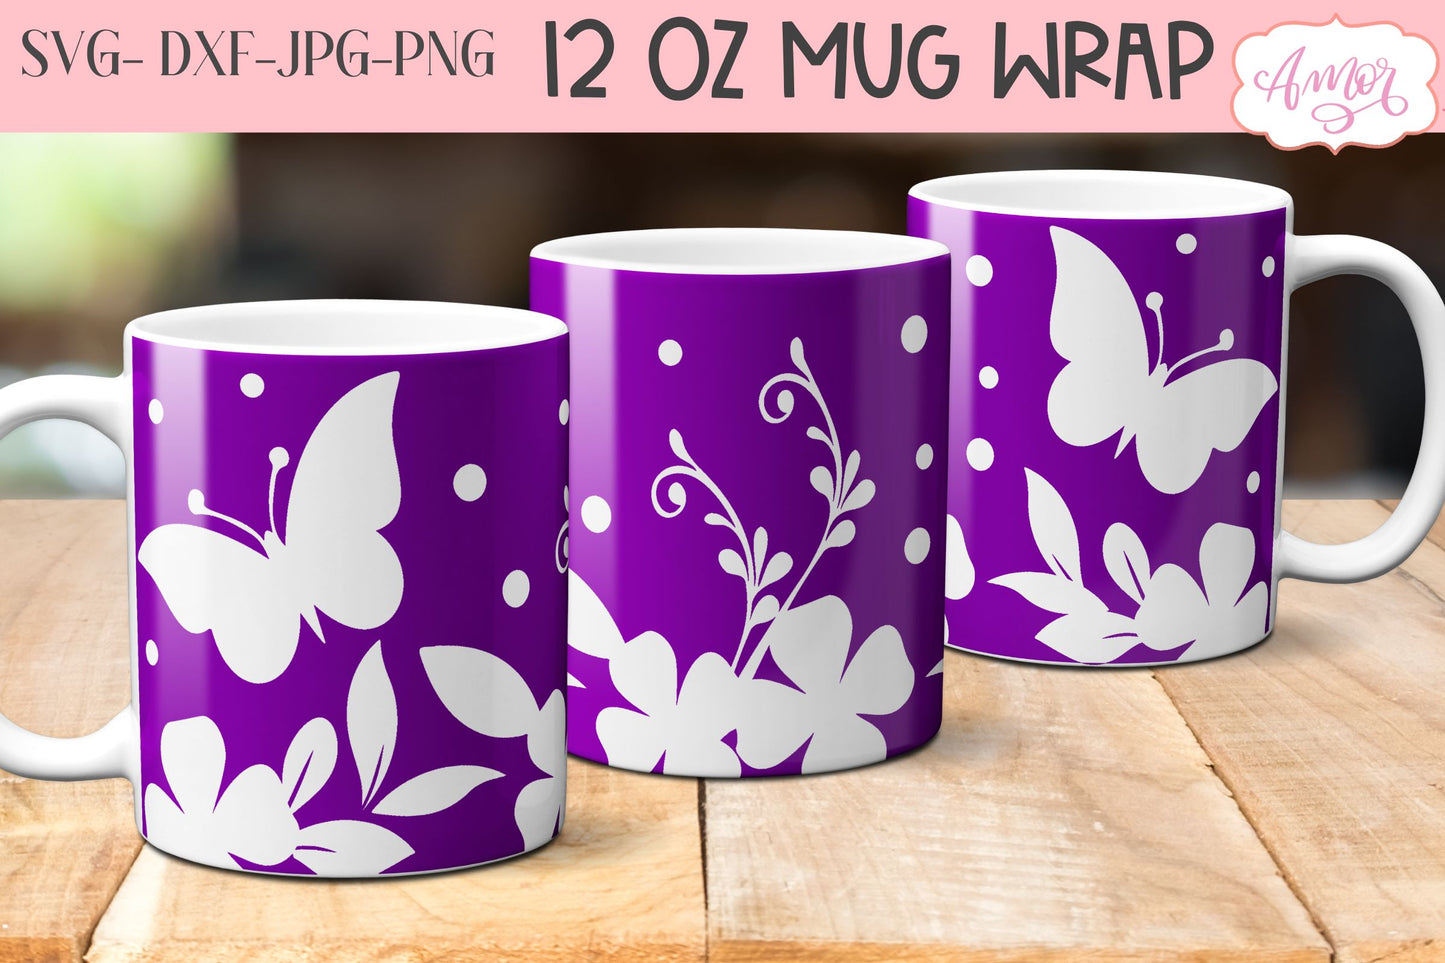 Butterfly and flowers mug wrap SVG for infusible ink